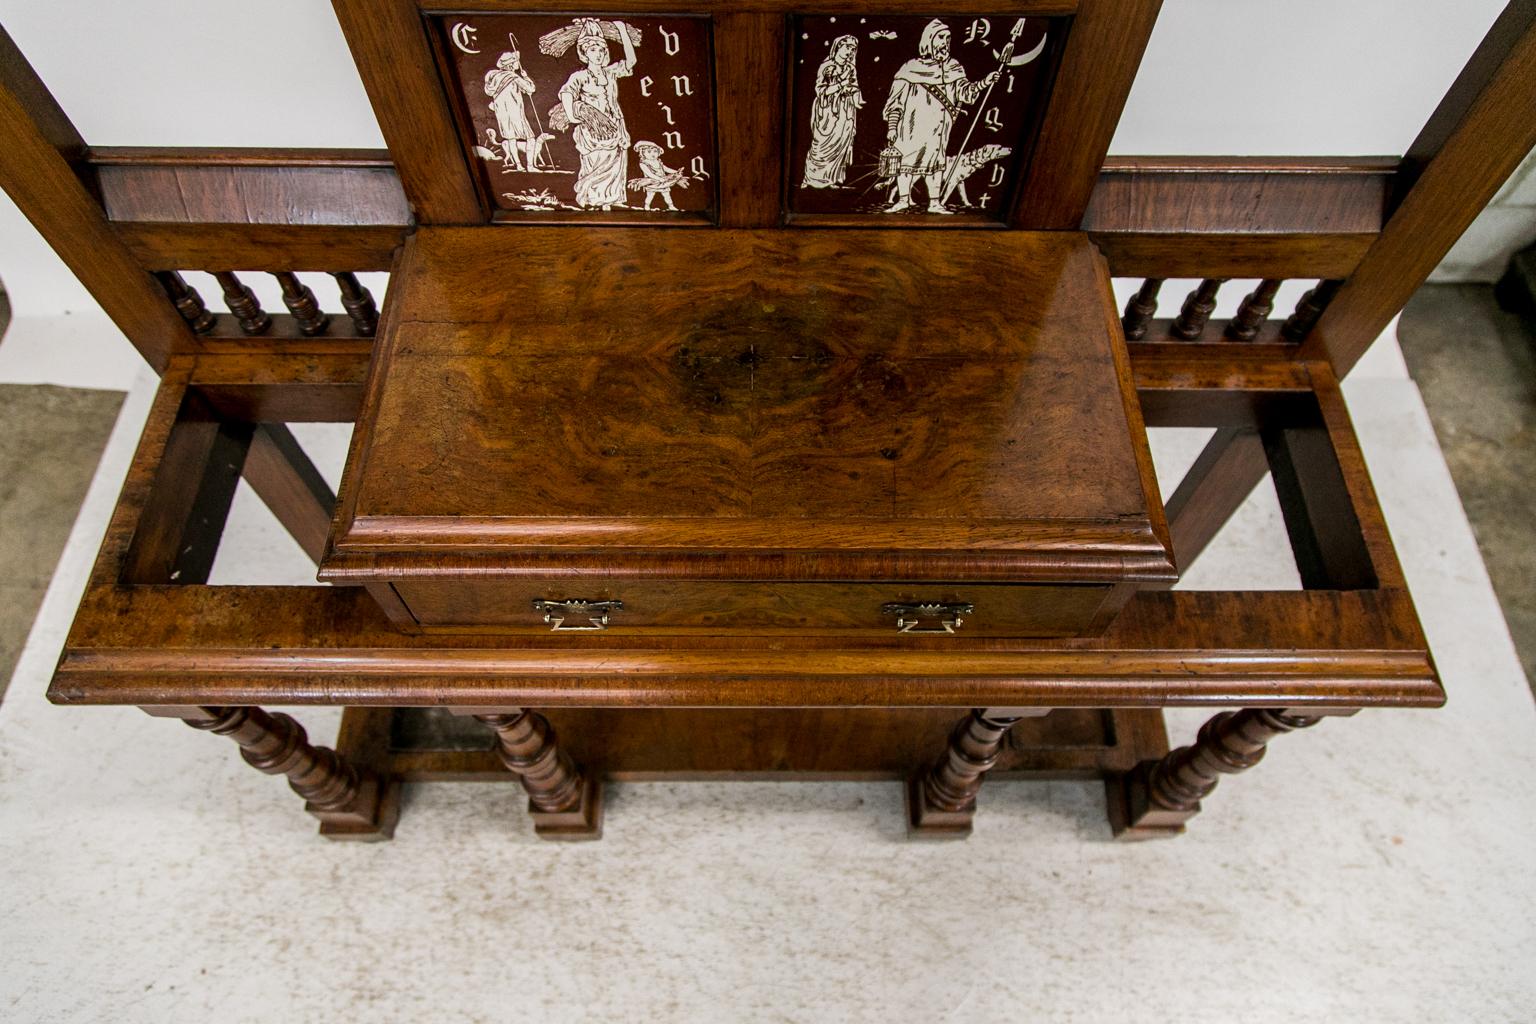 This walnut hall stand has an arched pediment with recessed graduated panels with a raised shield in the center. The frieze has a gallery of turned spindles above open panels on the sides that have beveled gothic arches supported by shaped brackets.